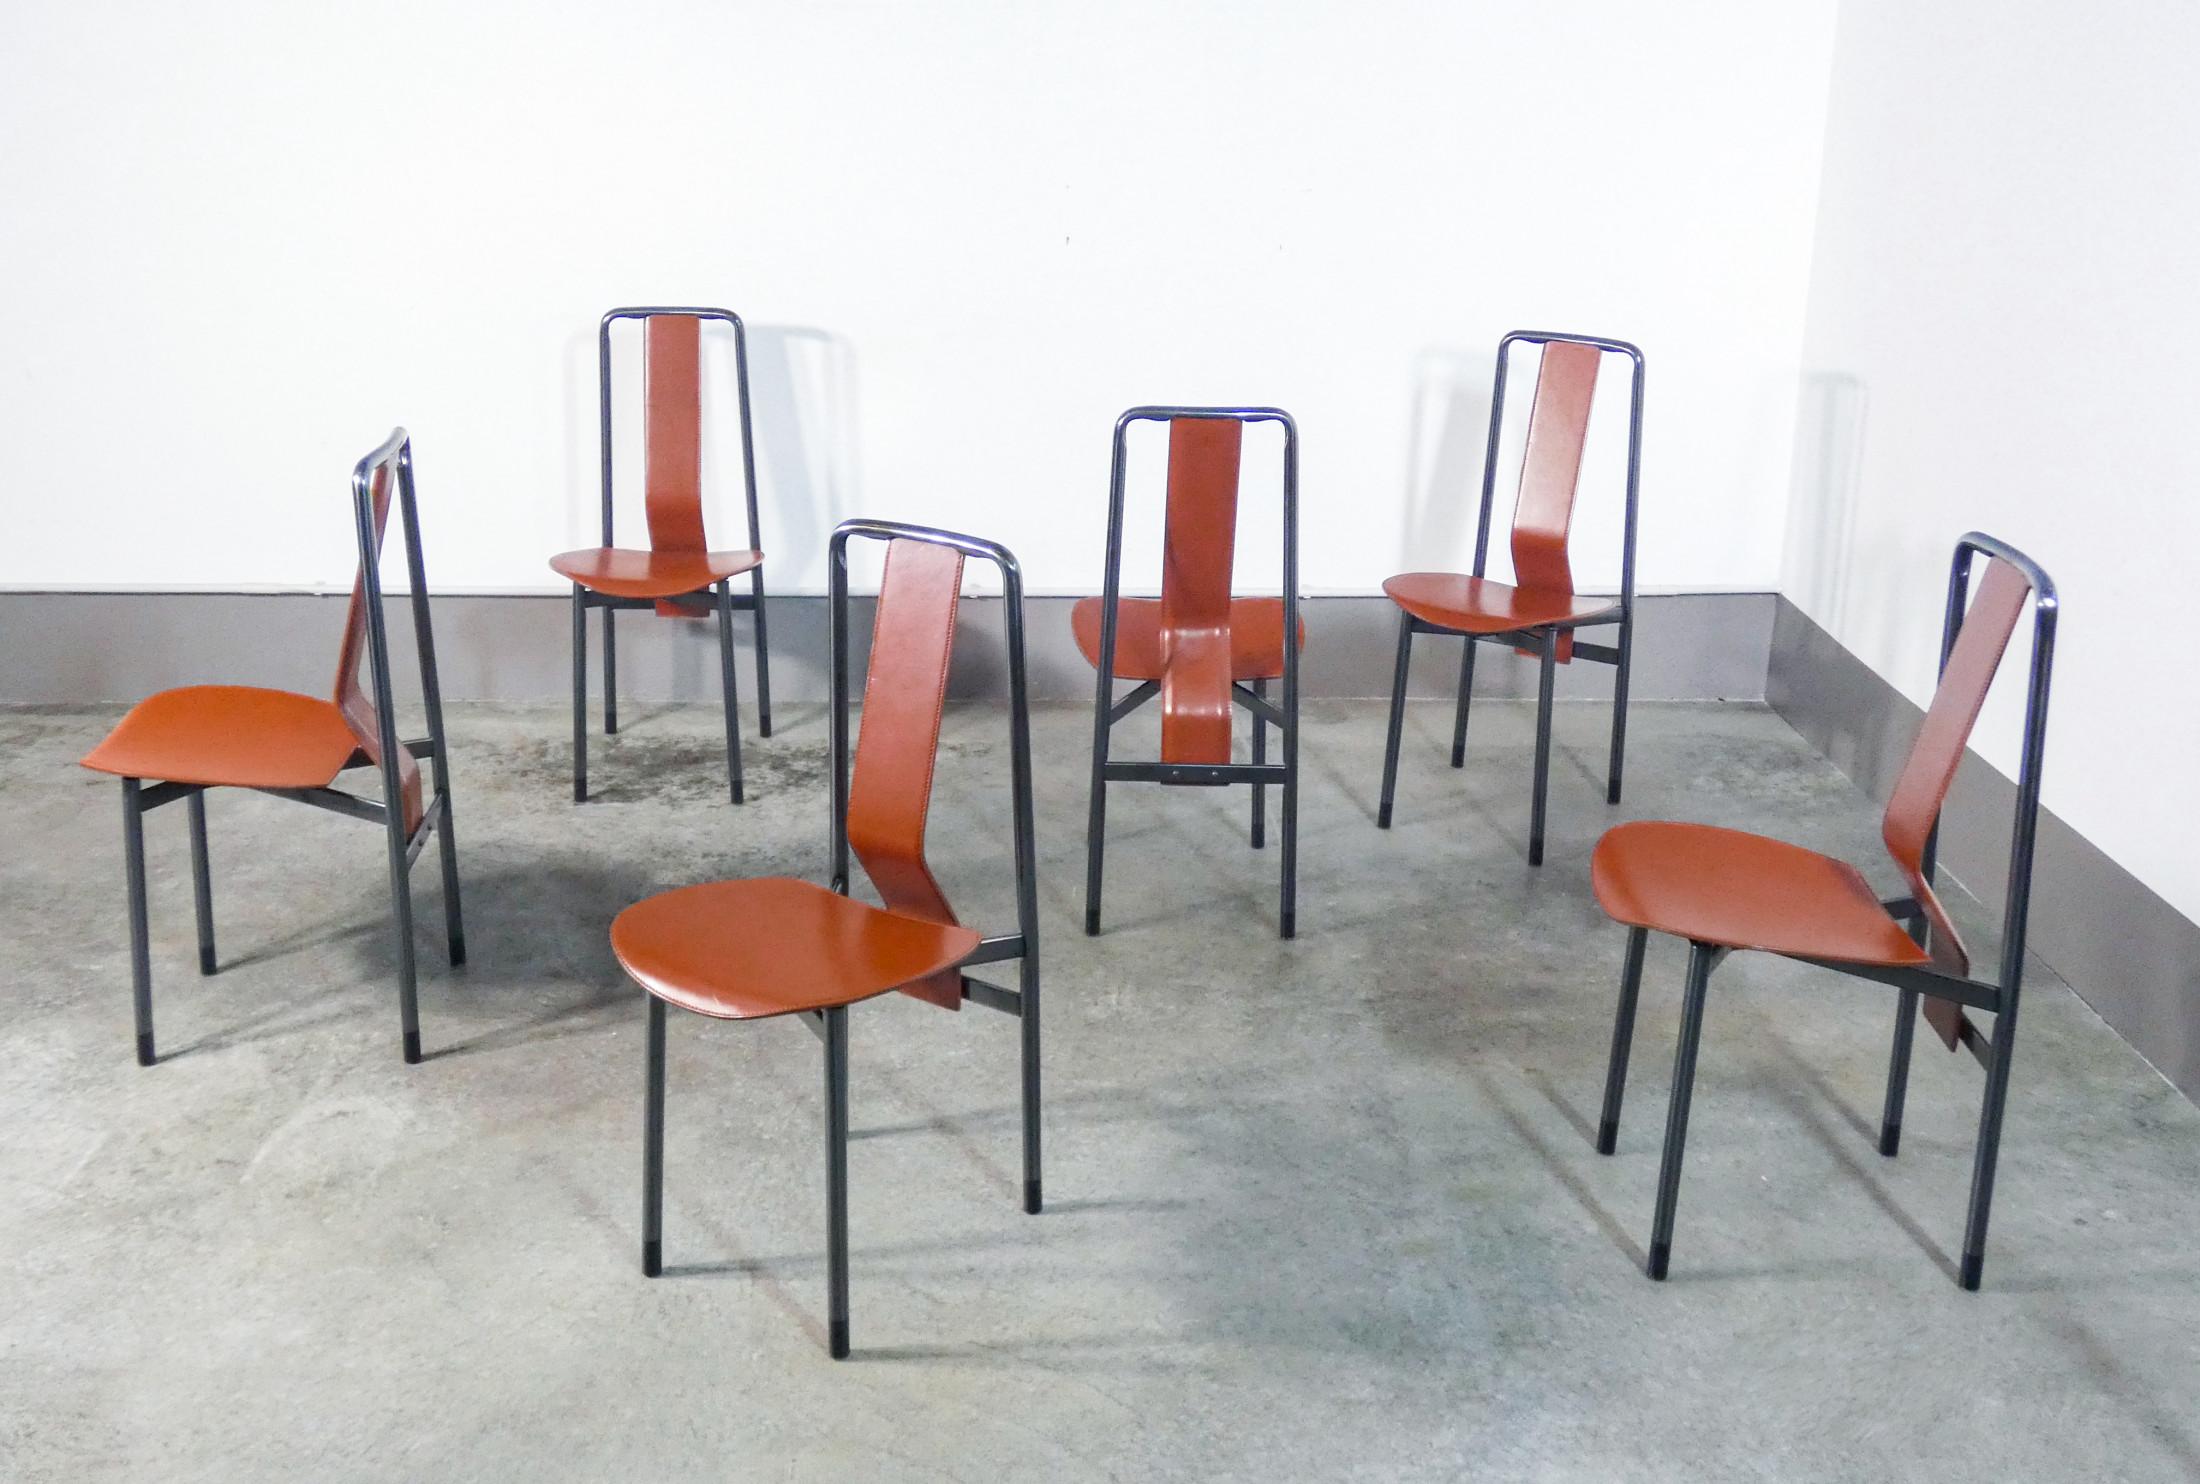 Set of six
Irma chairs, designed by
Achille Castiglioni
for Zanotta

Origin
Italy

Period
1979

Designer
Achille Castiglioni

Brand
Zanotta

Model
Irma

Materials
Structure in black stove-enamelled steel, backrests and seats in